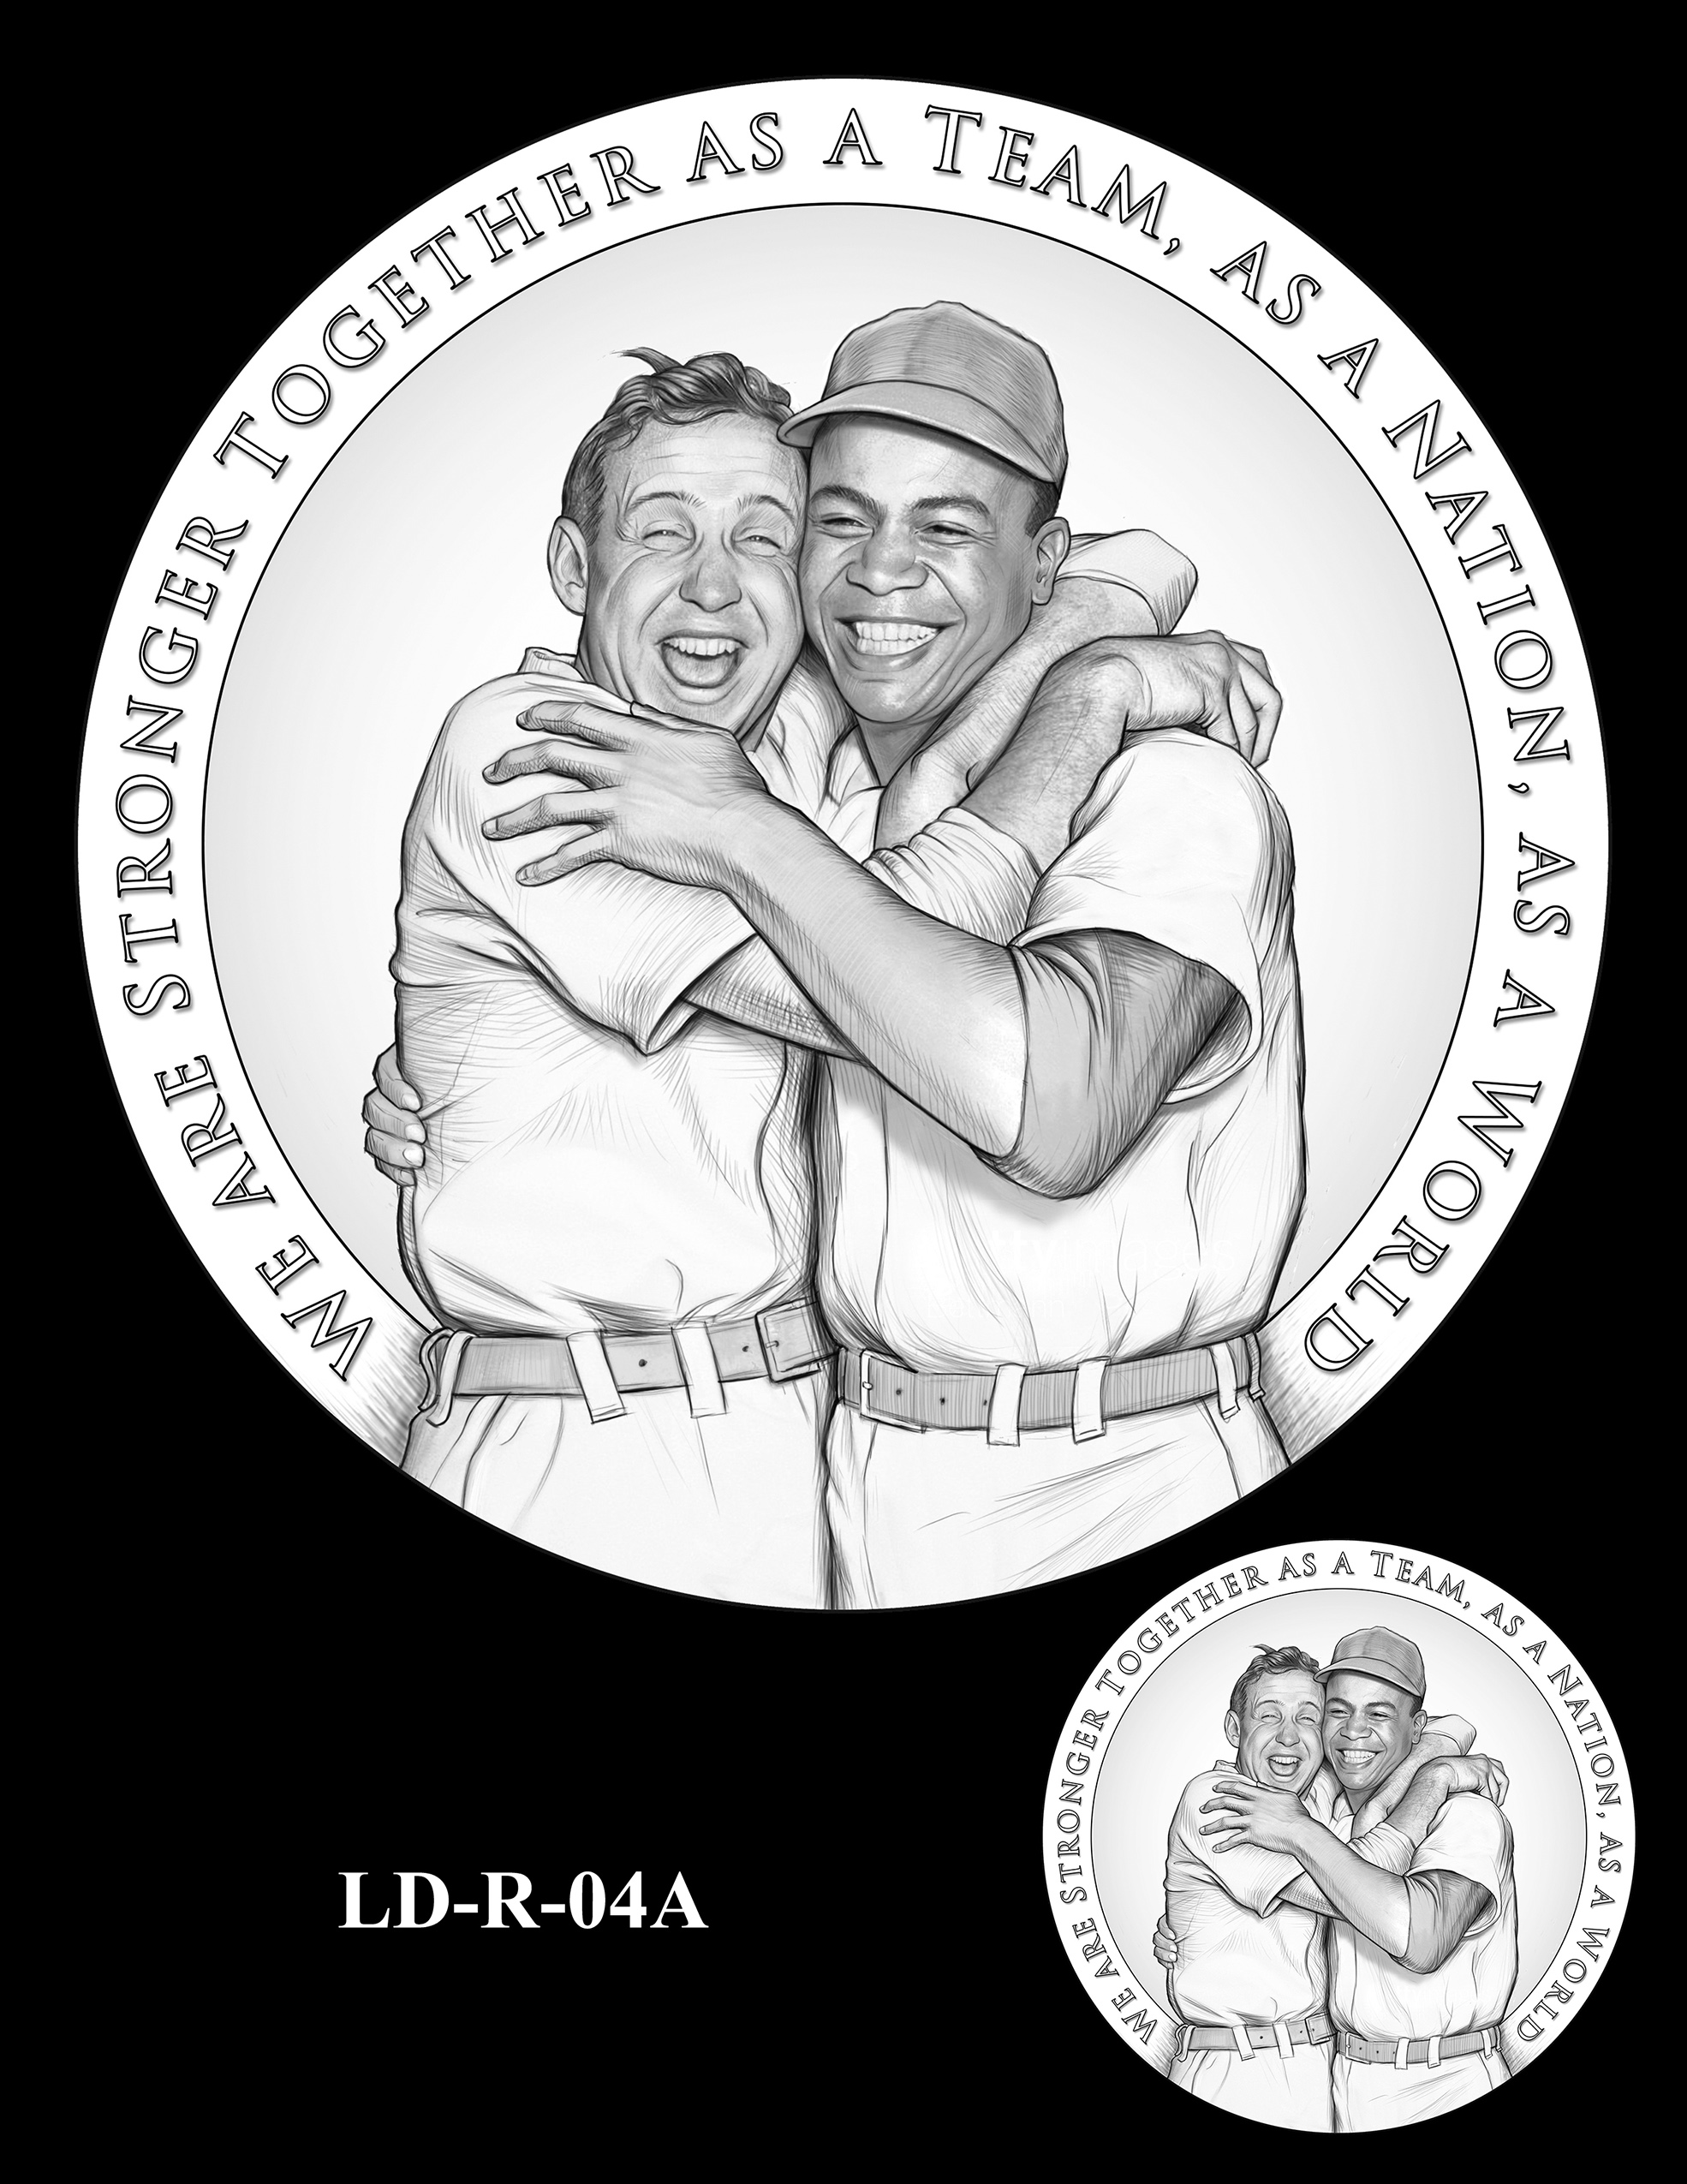 LD-R-04A -- Larry Doby Congressional Gold Medal